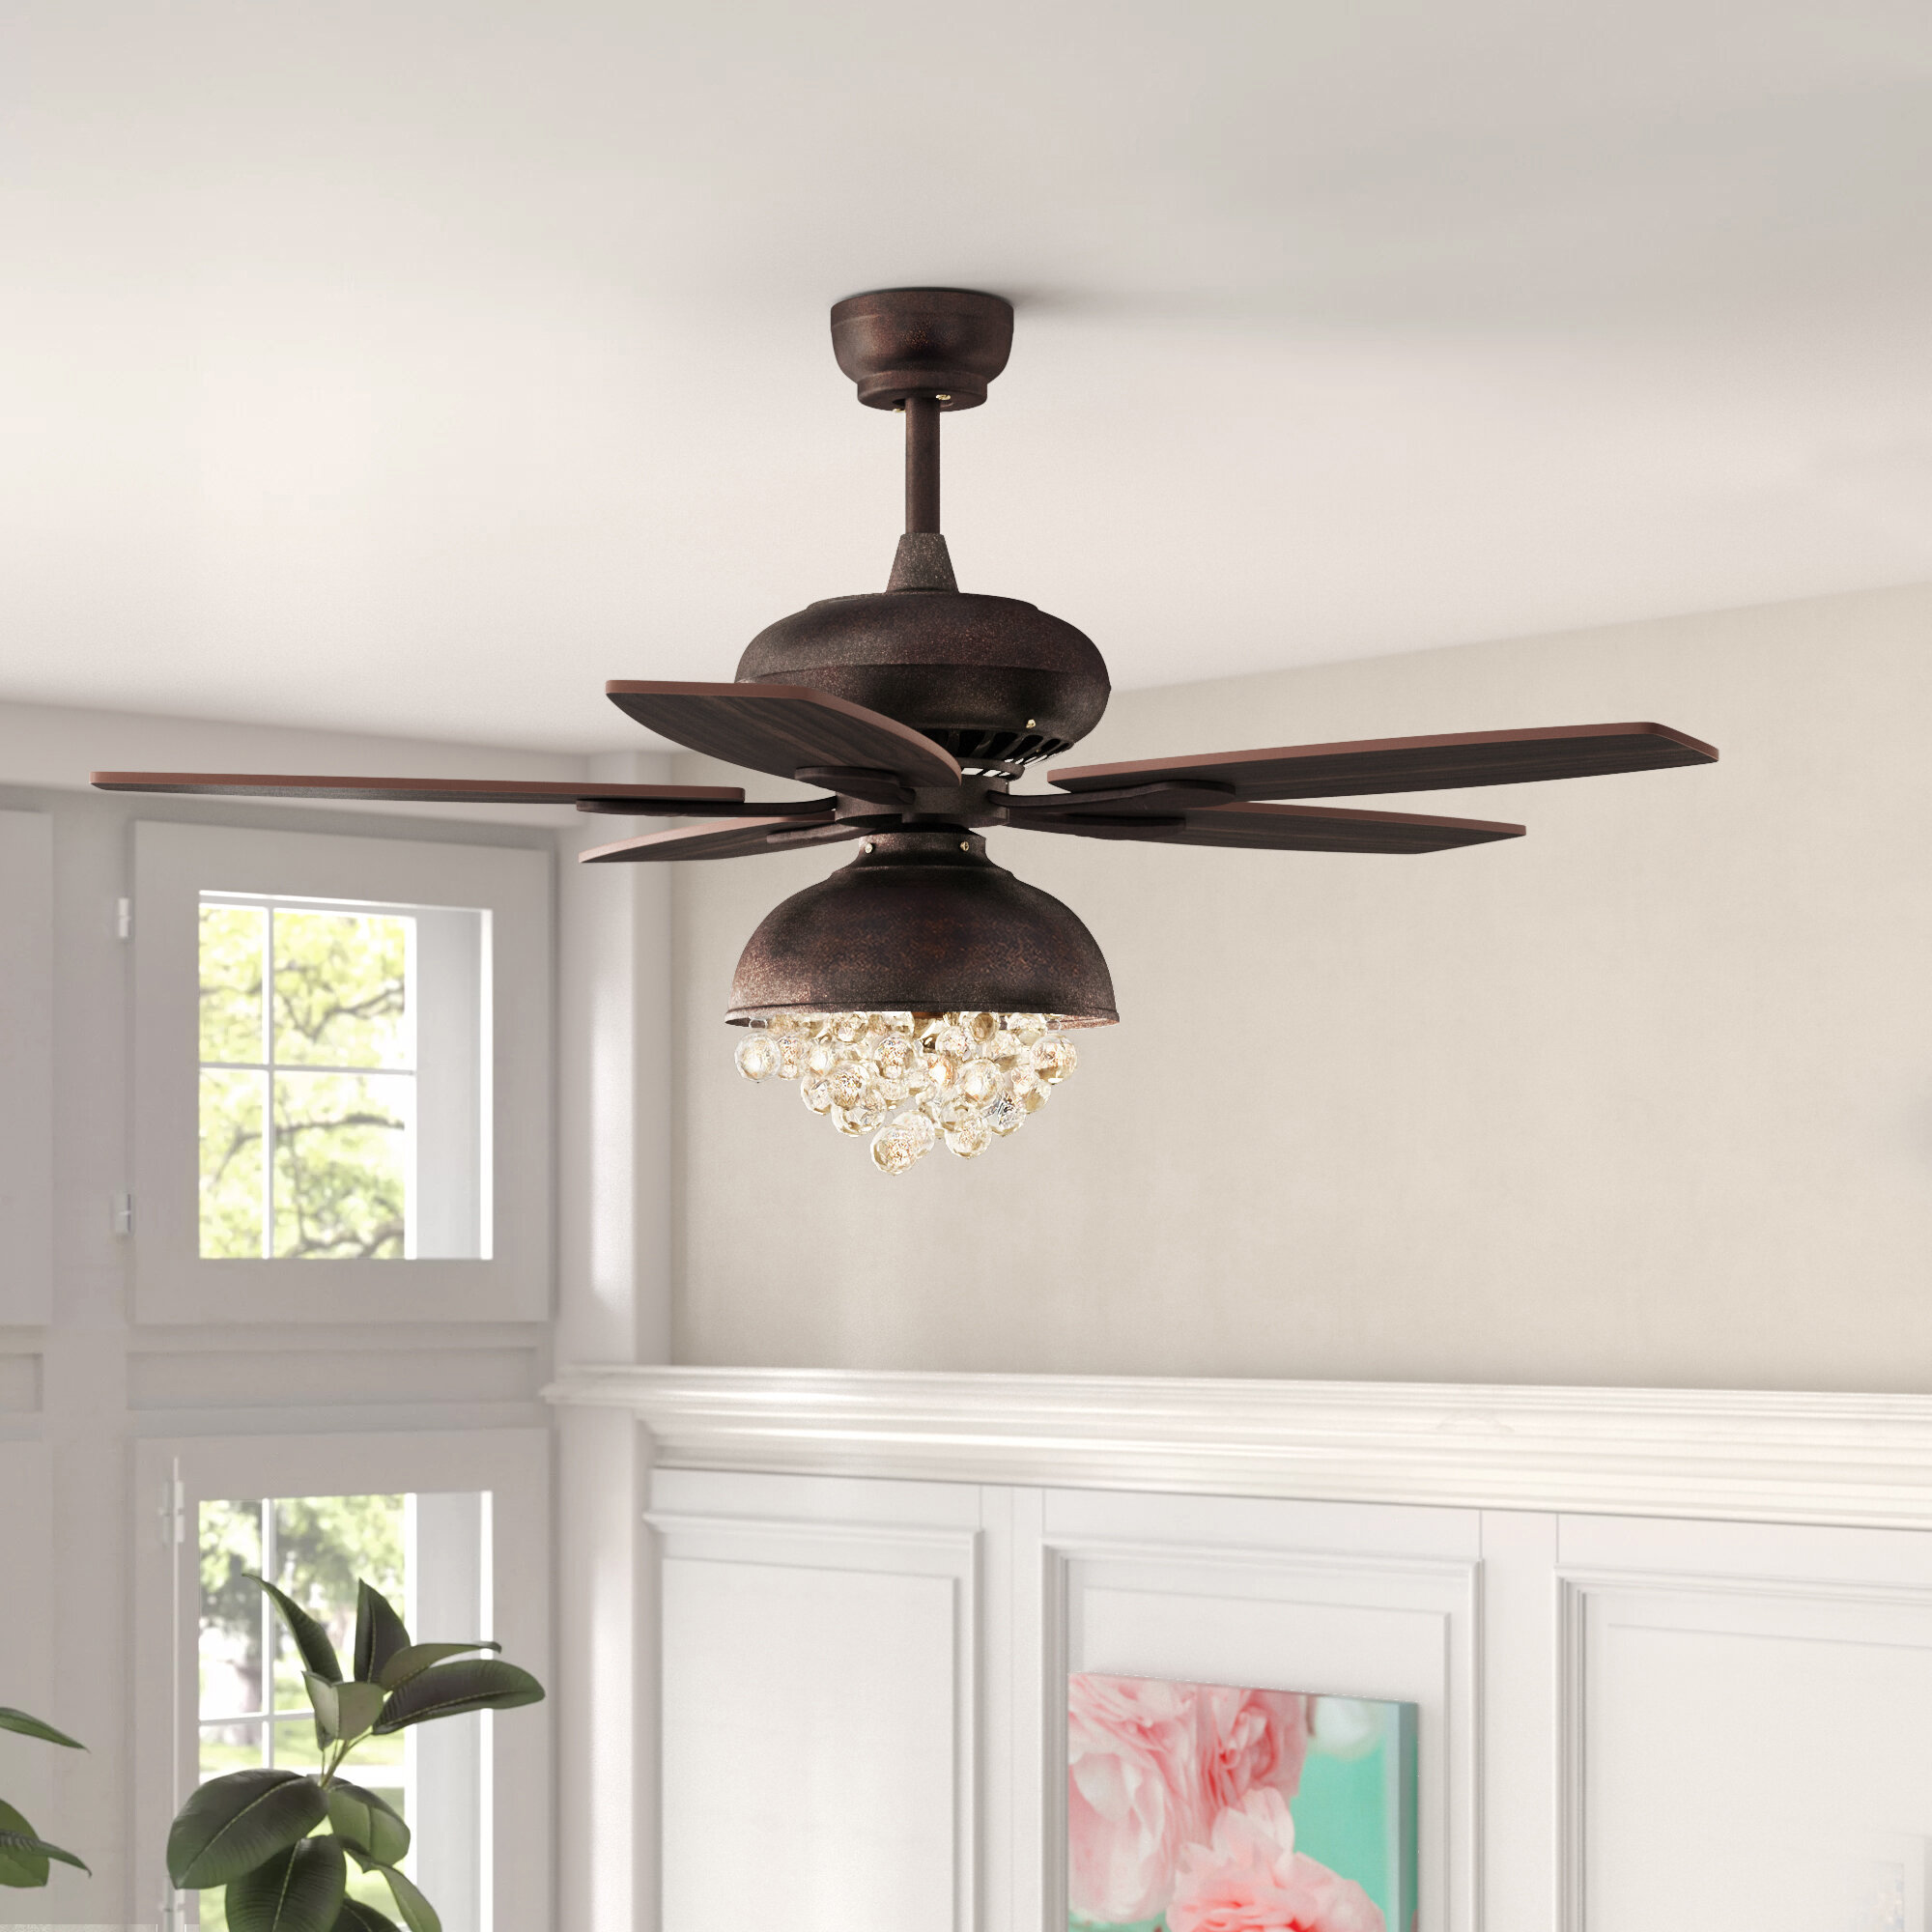 House Of Hampton 52 Davidson 5 Blade Ceiling Fan With Remote